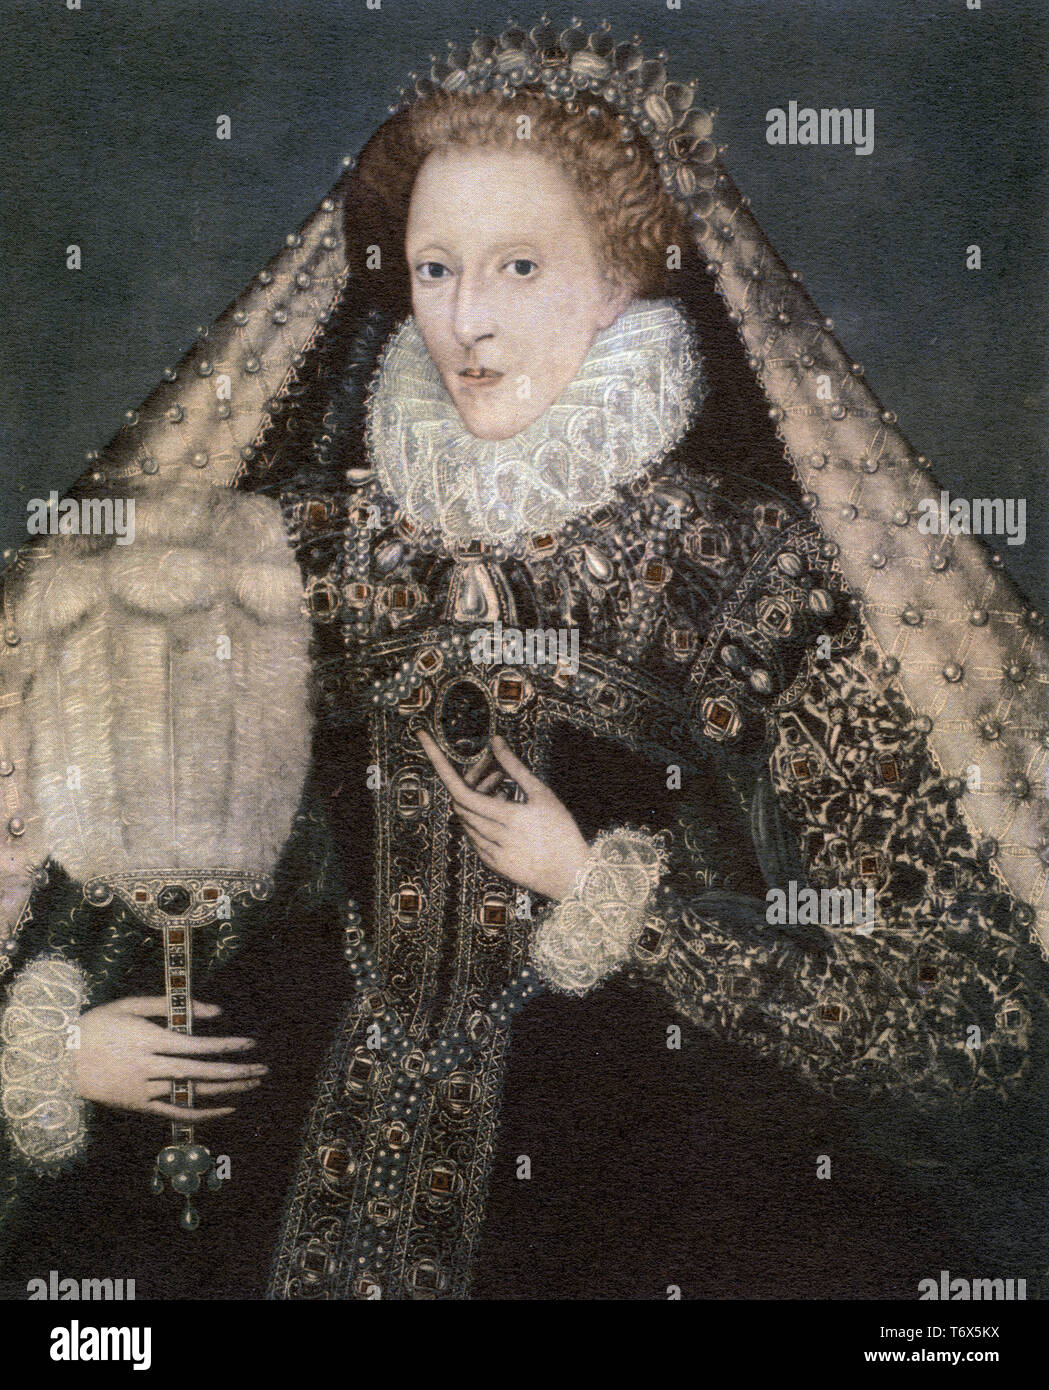 Elizabeth I (1533–1603). After Federico Zuccari, also known as Federico Zuccaro (c1540–1609). Elizabeth I, Queen of England and Ireland from 17 November 1558 until her death on 24 March 1603. Sometimes called The Virgin Queen, Gloriana or Good Queen Bess, Elizabeth was the last monarch of the House of Tudor. Stock Photo